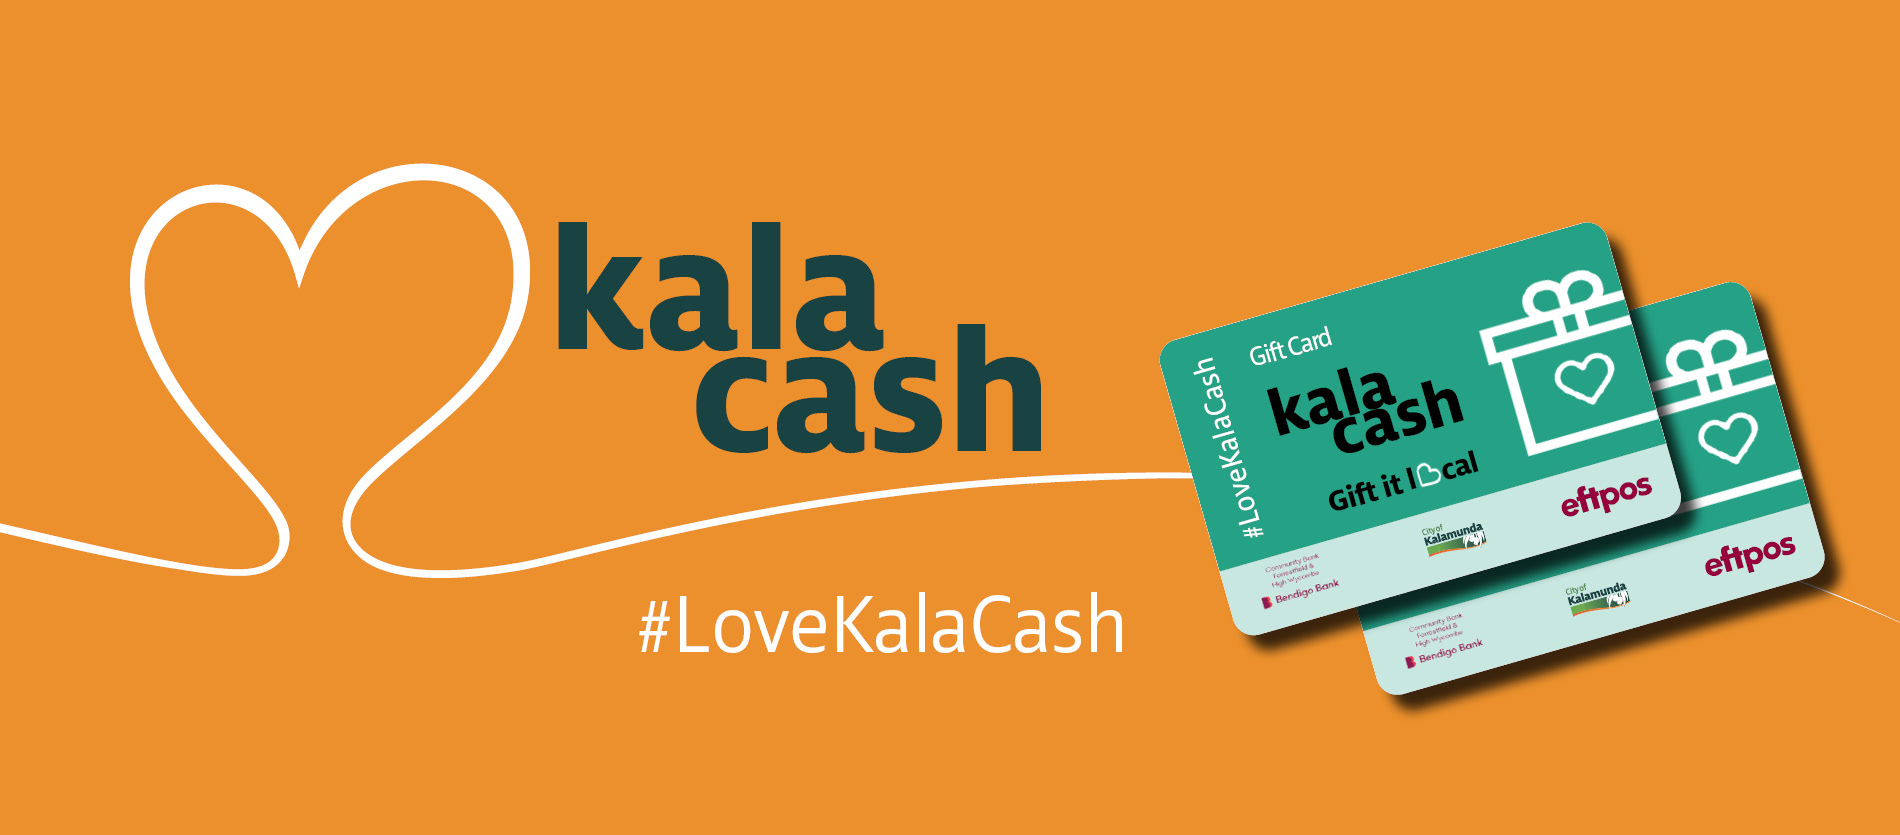 Graphic promoting the KalaCash Keeping it Local campaign using Eftpos type cards